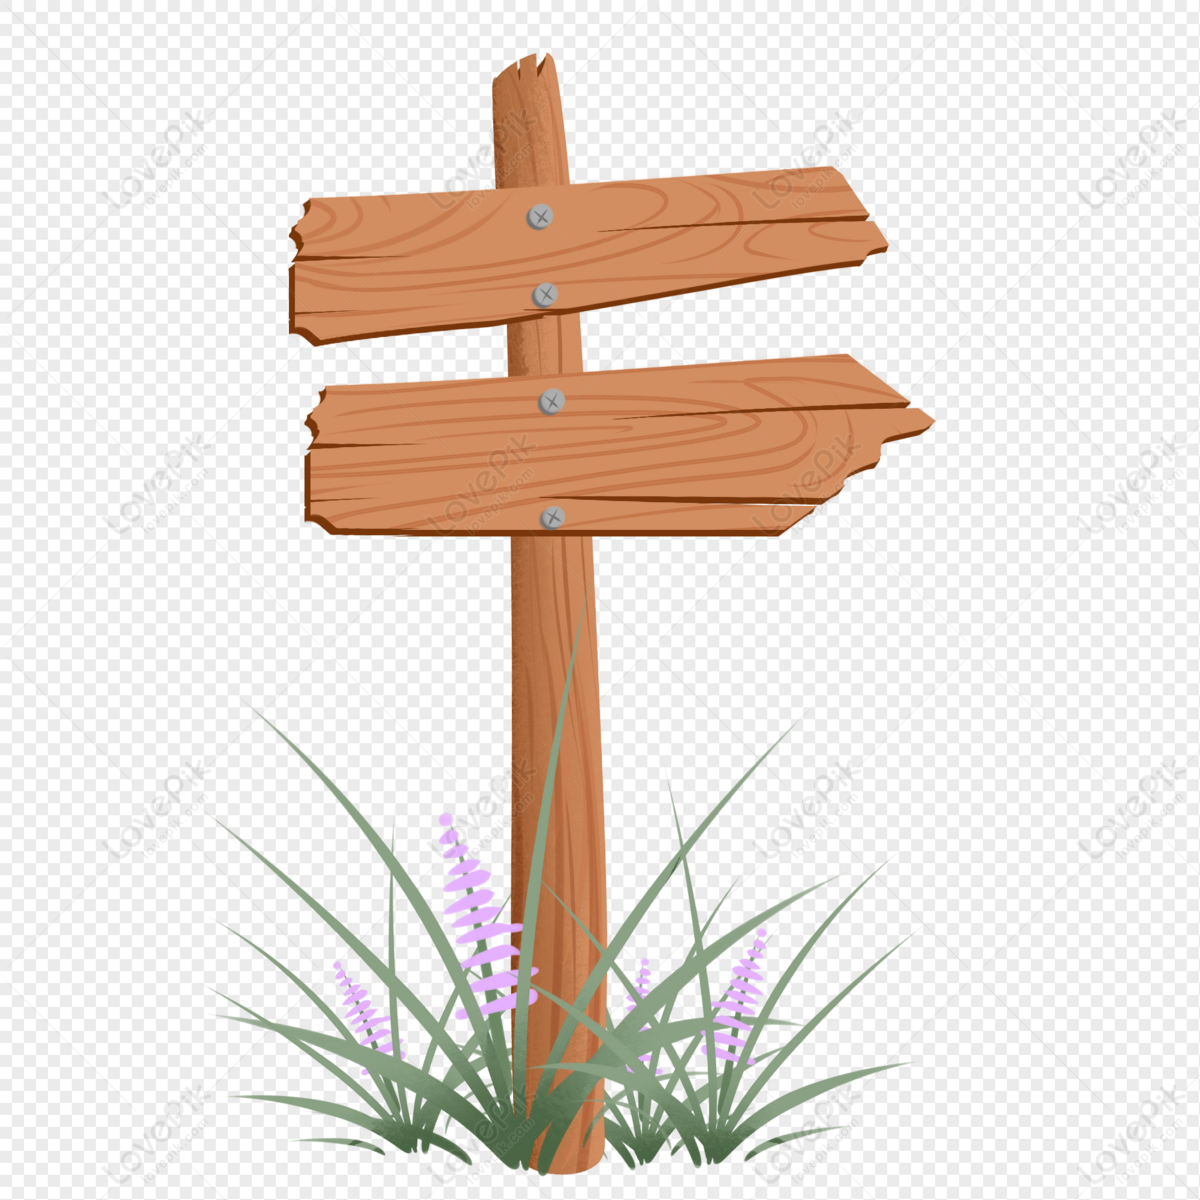 Double board wood sign board wooden sign, board, wooden, double png transparent image